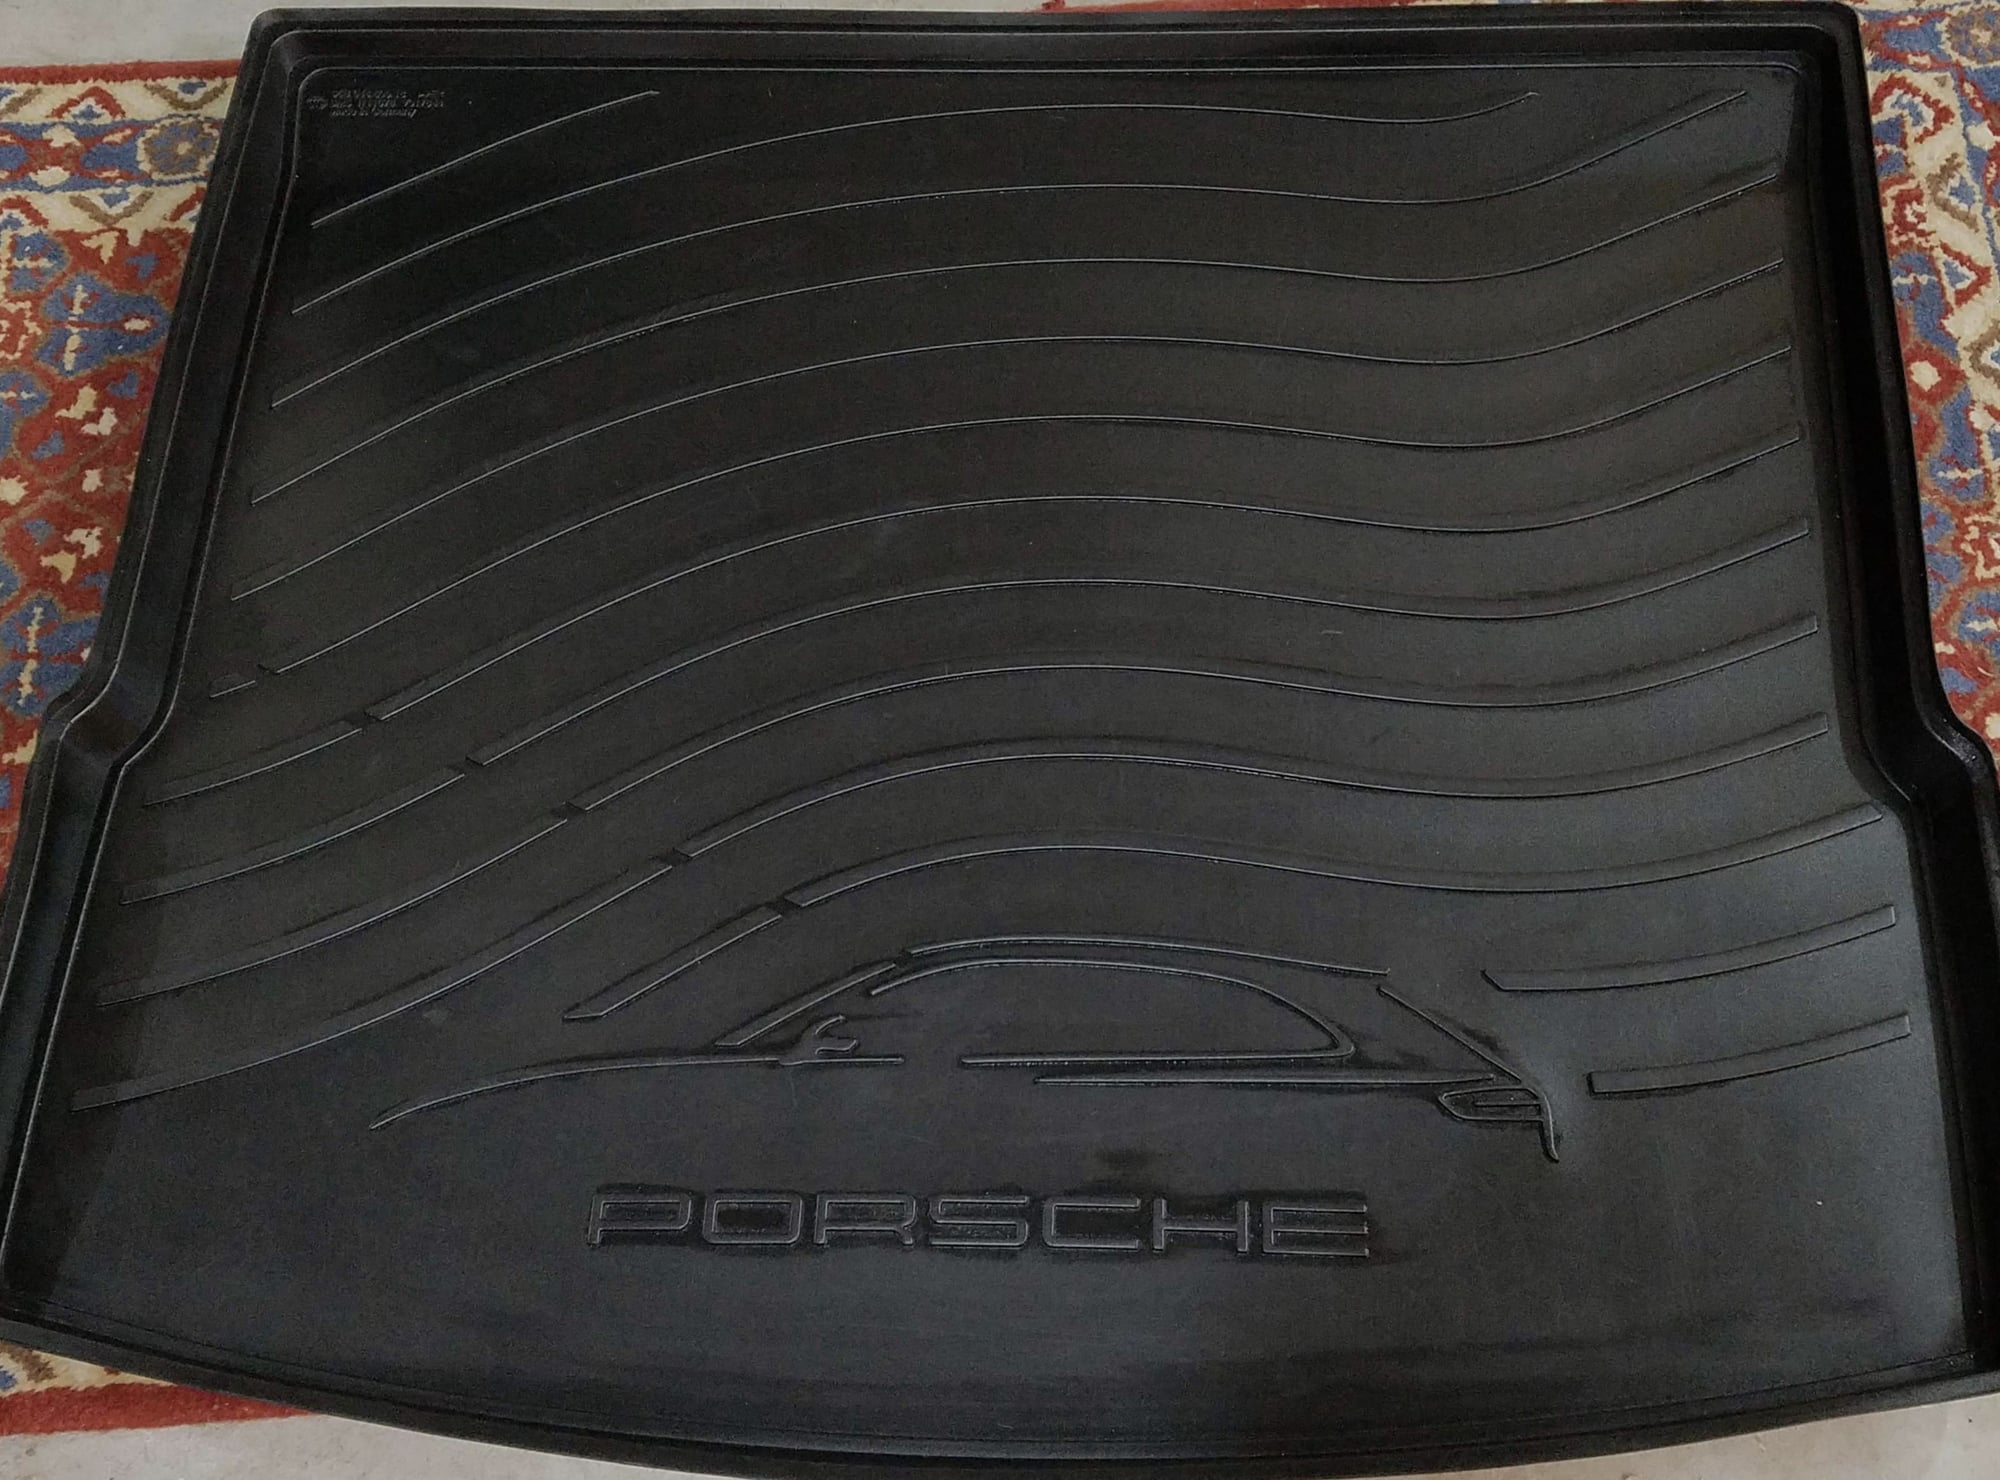 Interior/Upholstery - Macan Parts: OEM Rubber Mats, OEM Trunk liner - Used - 2015 to 2019 Porsche Macan - Weehawken, NJ 07086, United States